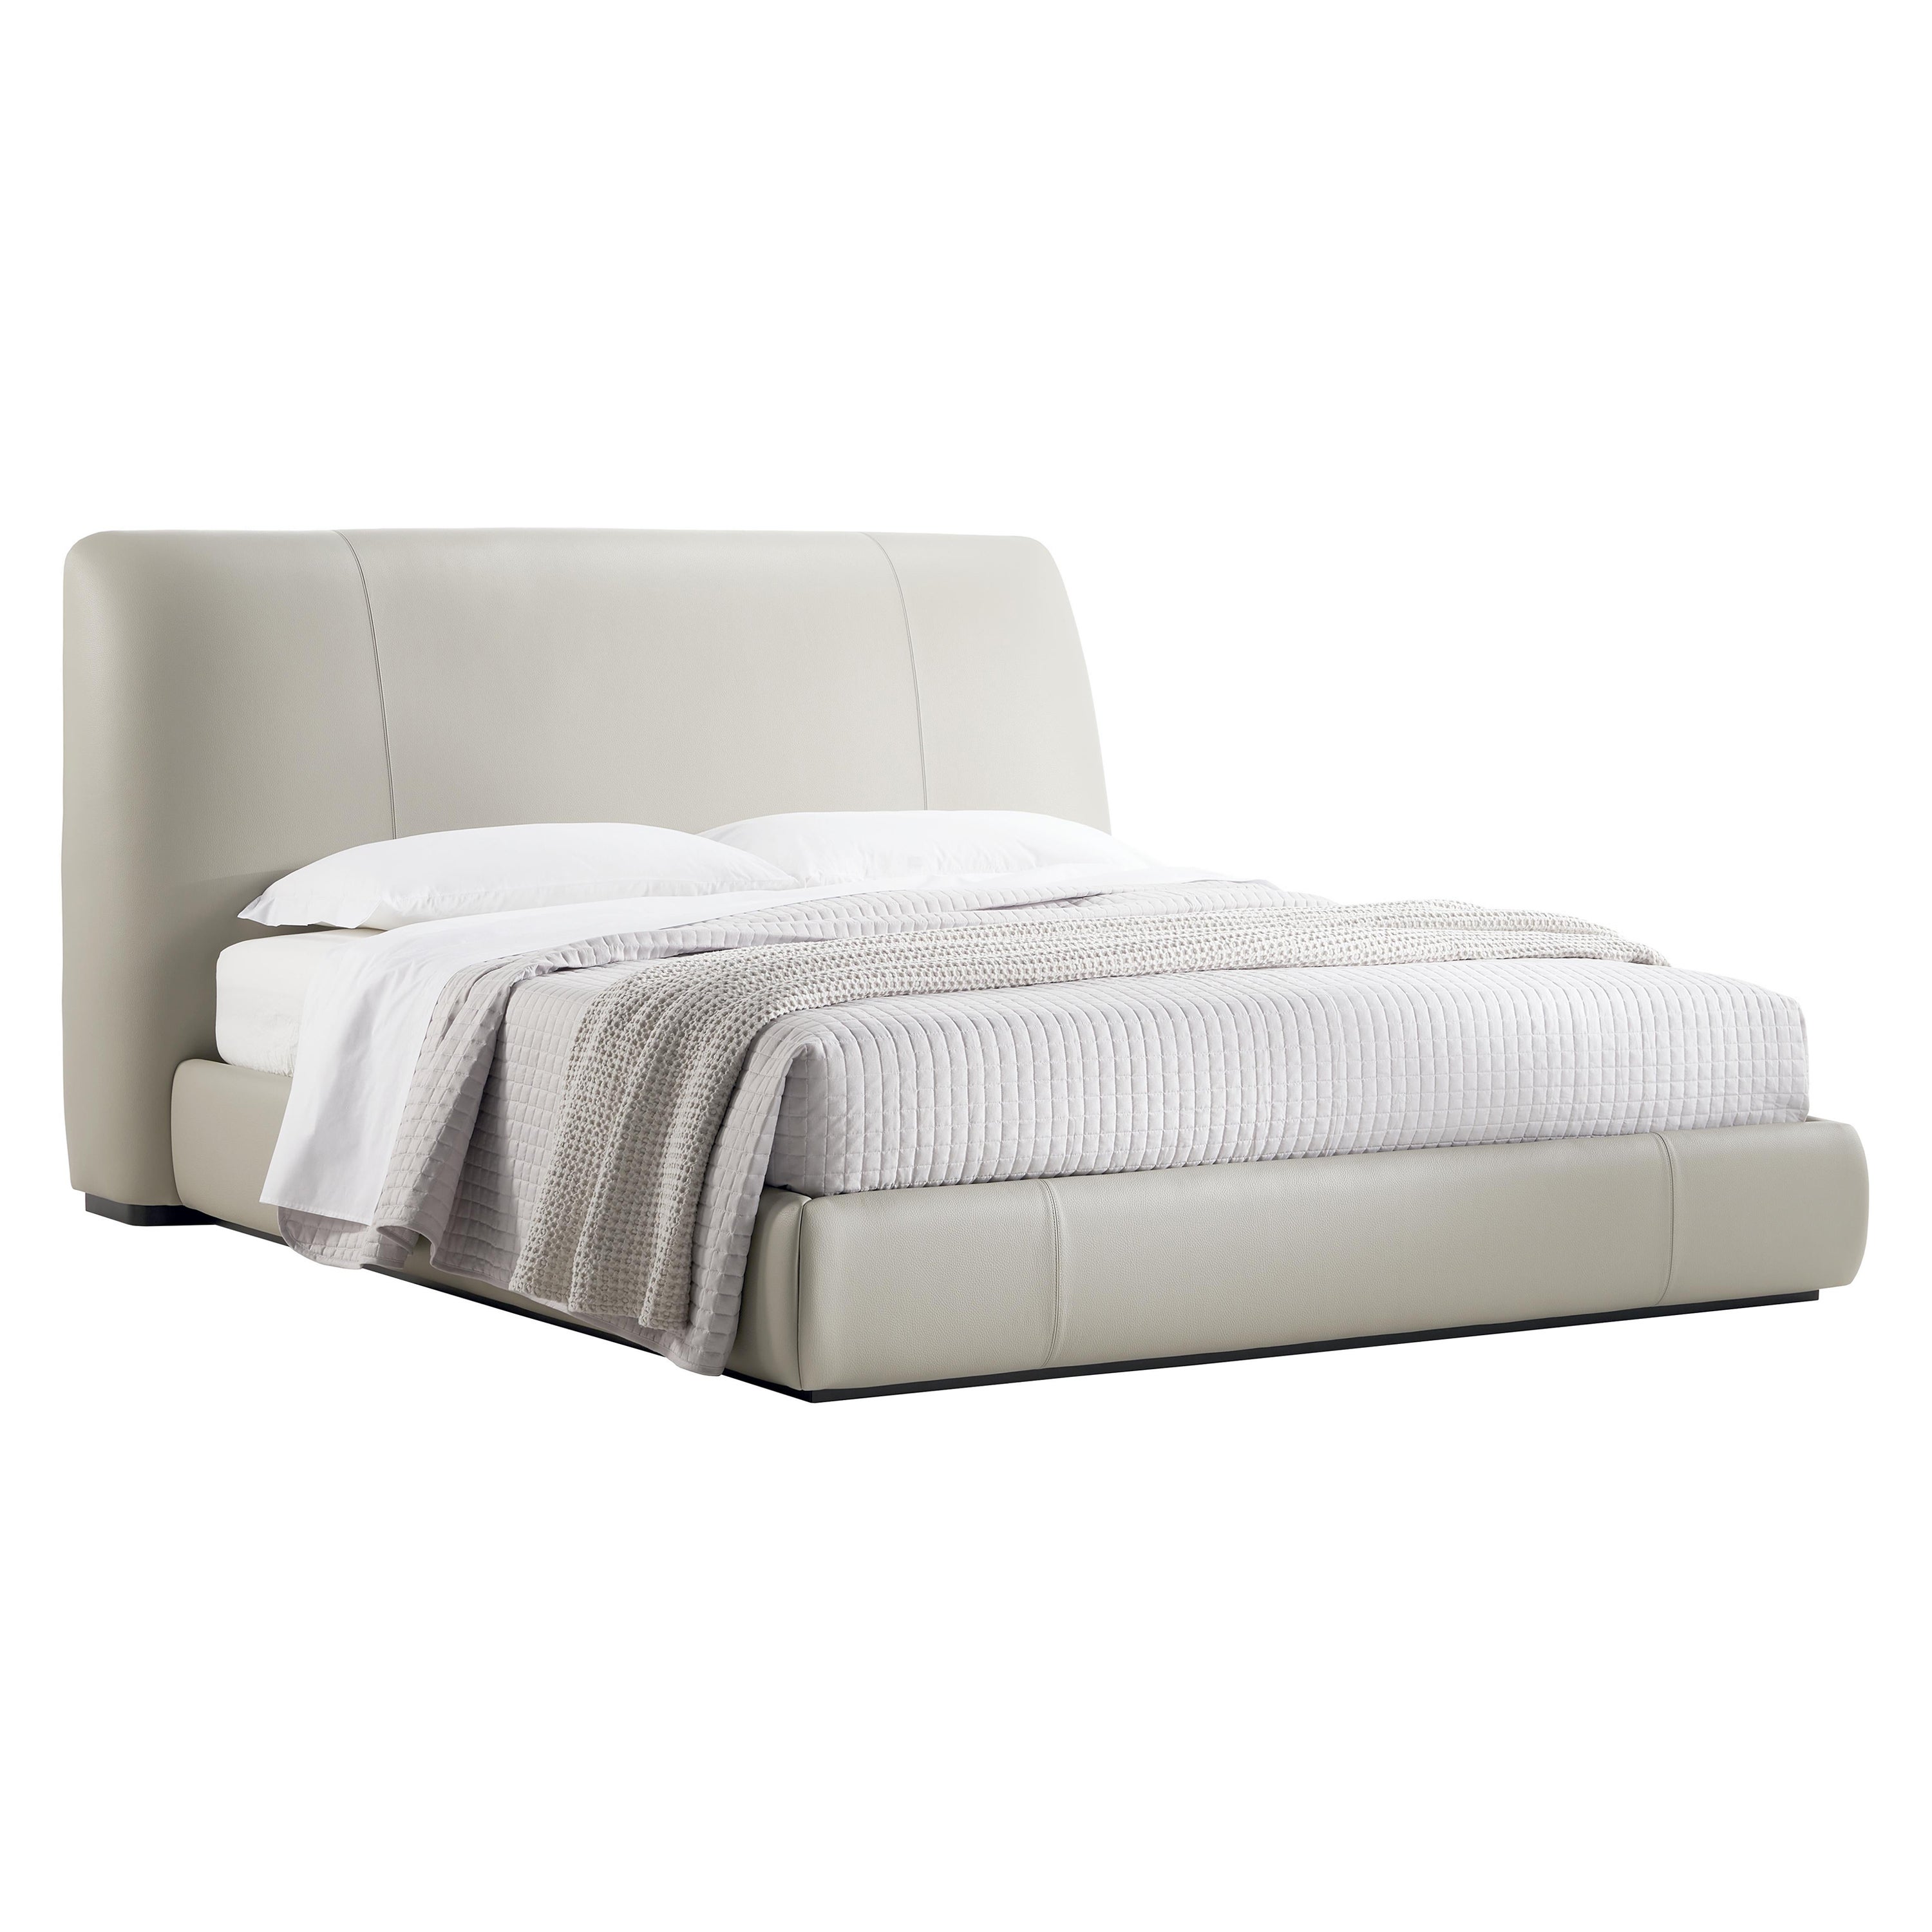 ANCORA bed in genuine beige leather. By Legame Italia For Sale